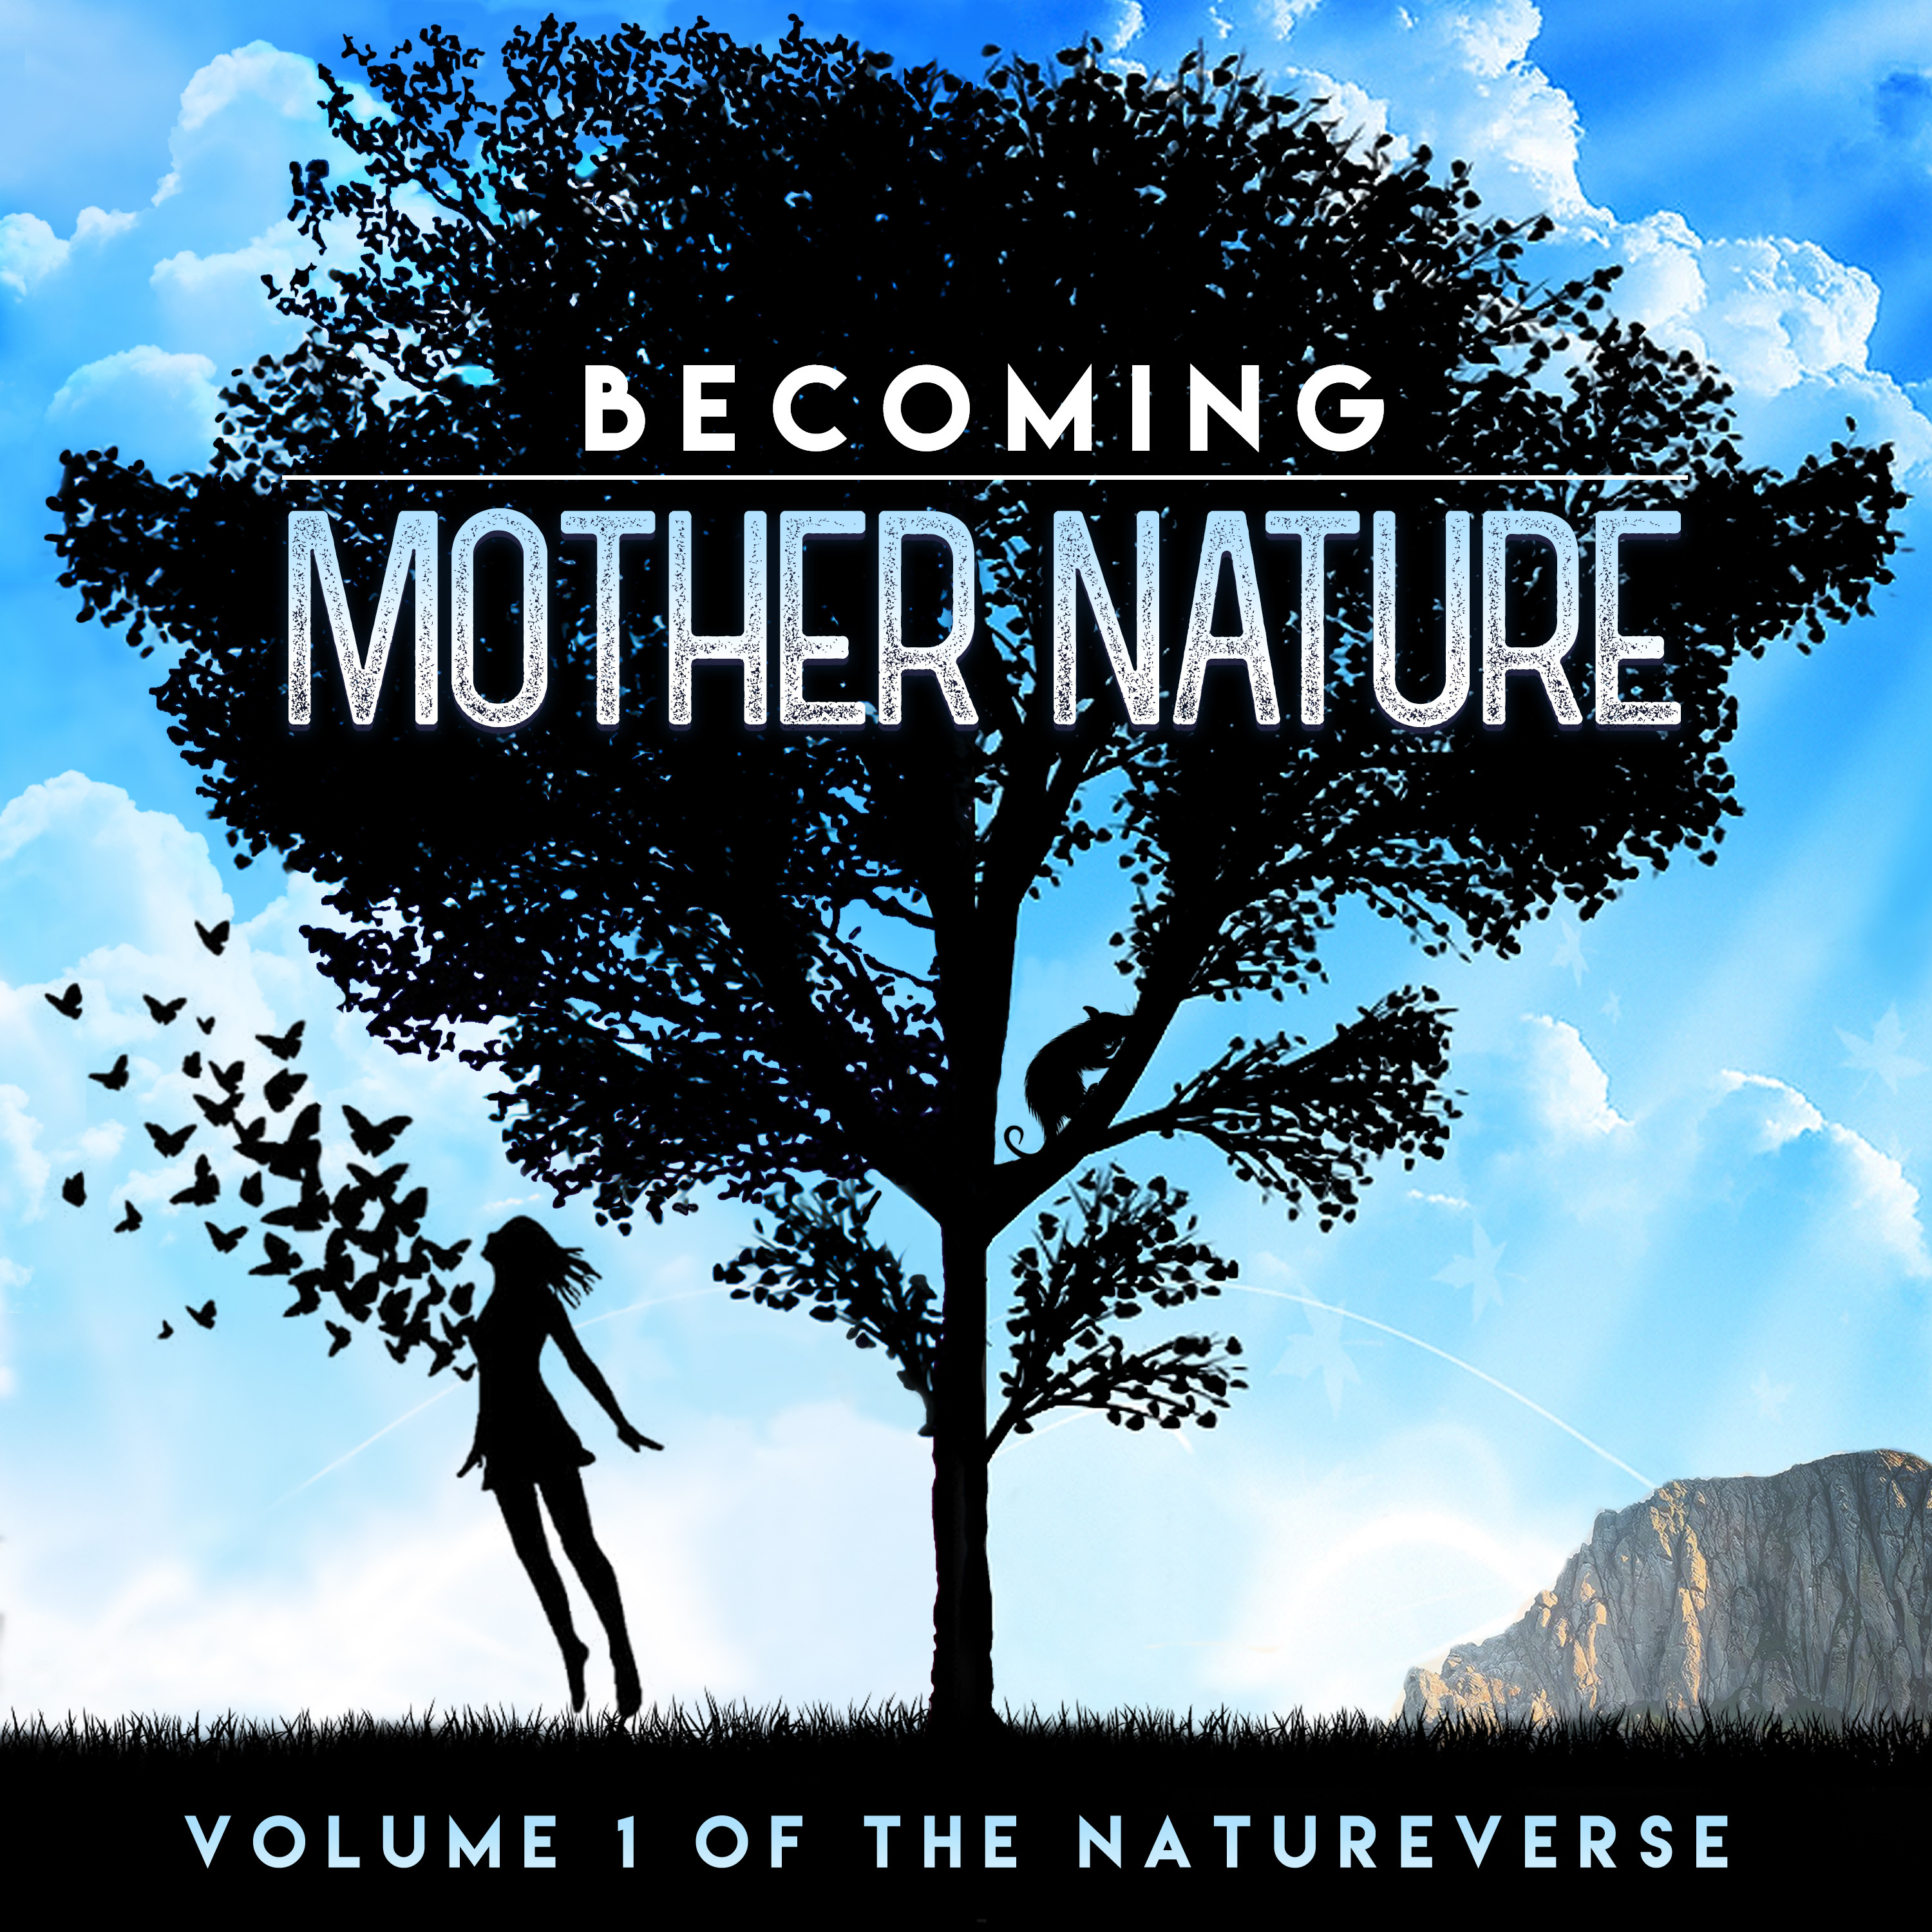 S1 E1: Becoming Mother Nature: Blizzard